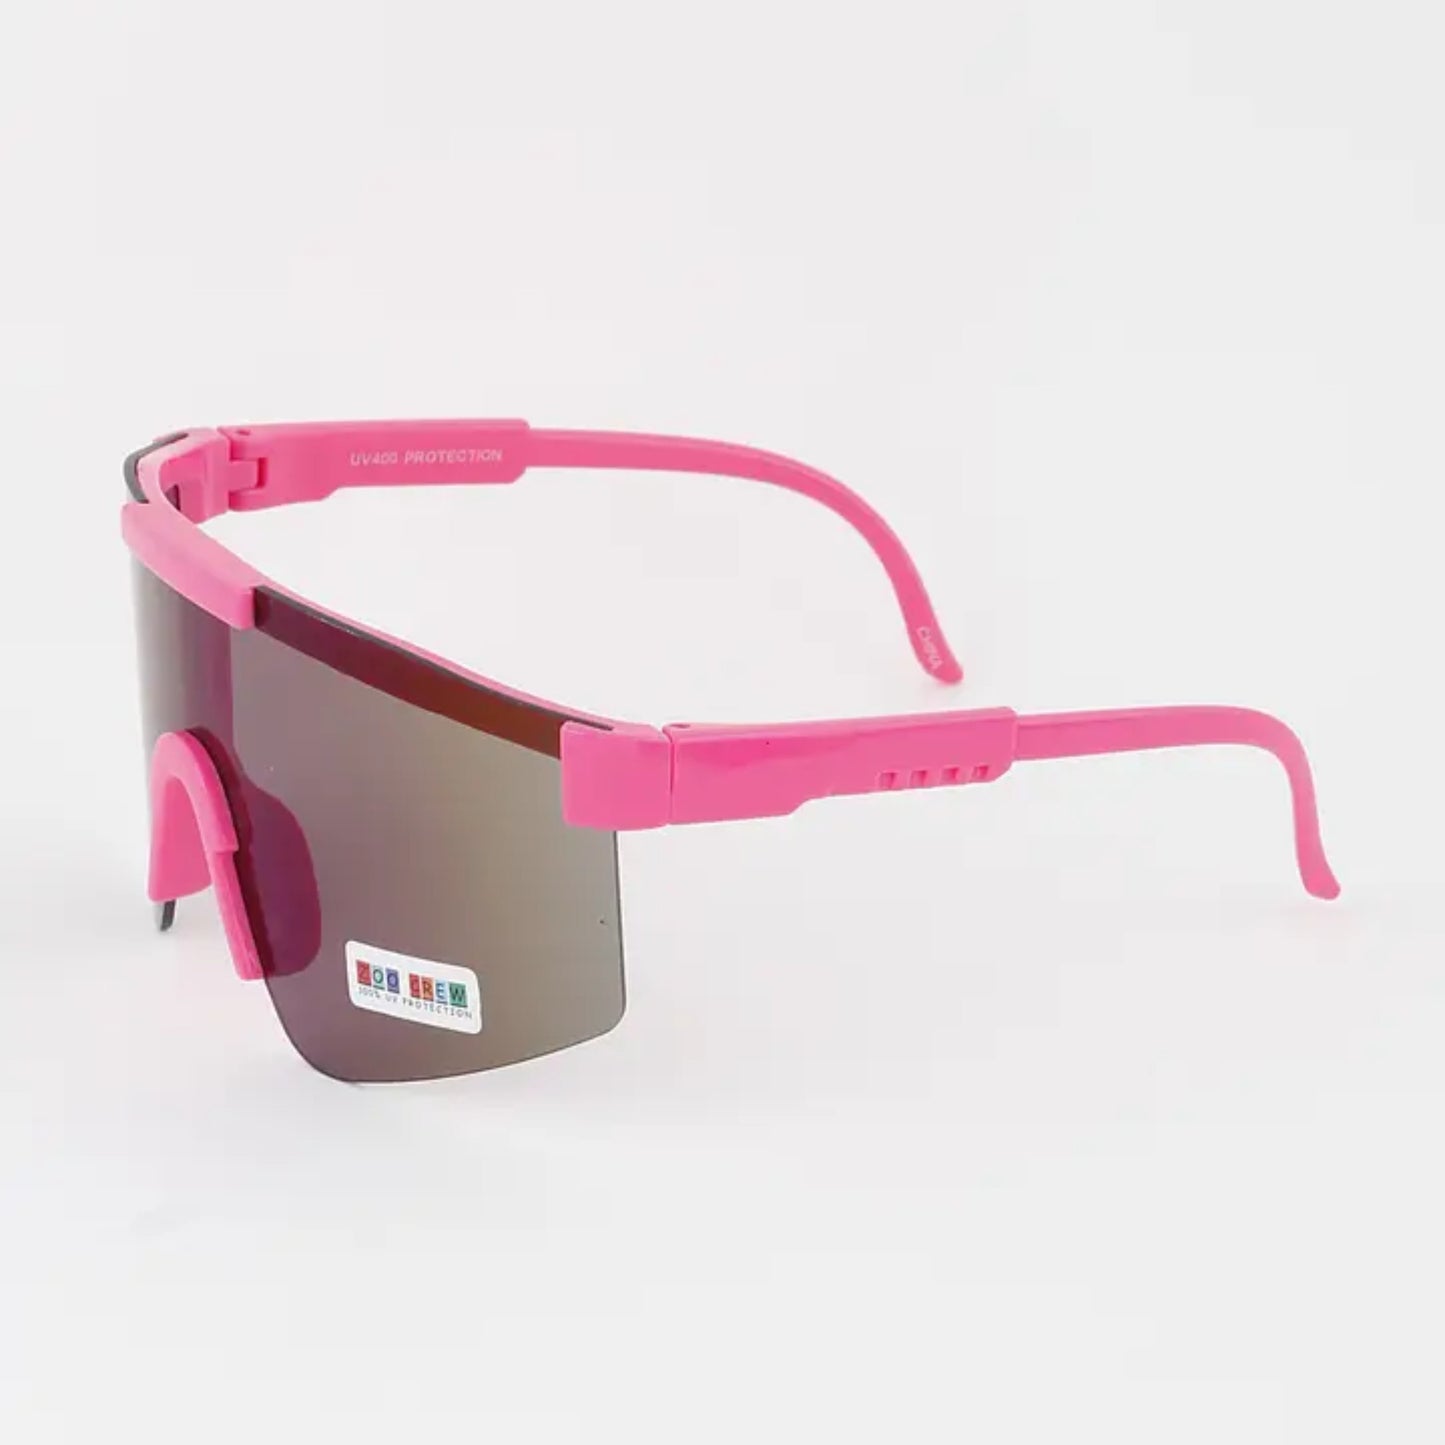 Kids Bright Polycarbonate Shield Sunglasses - Talk to the Hand